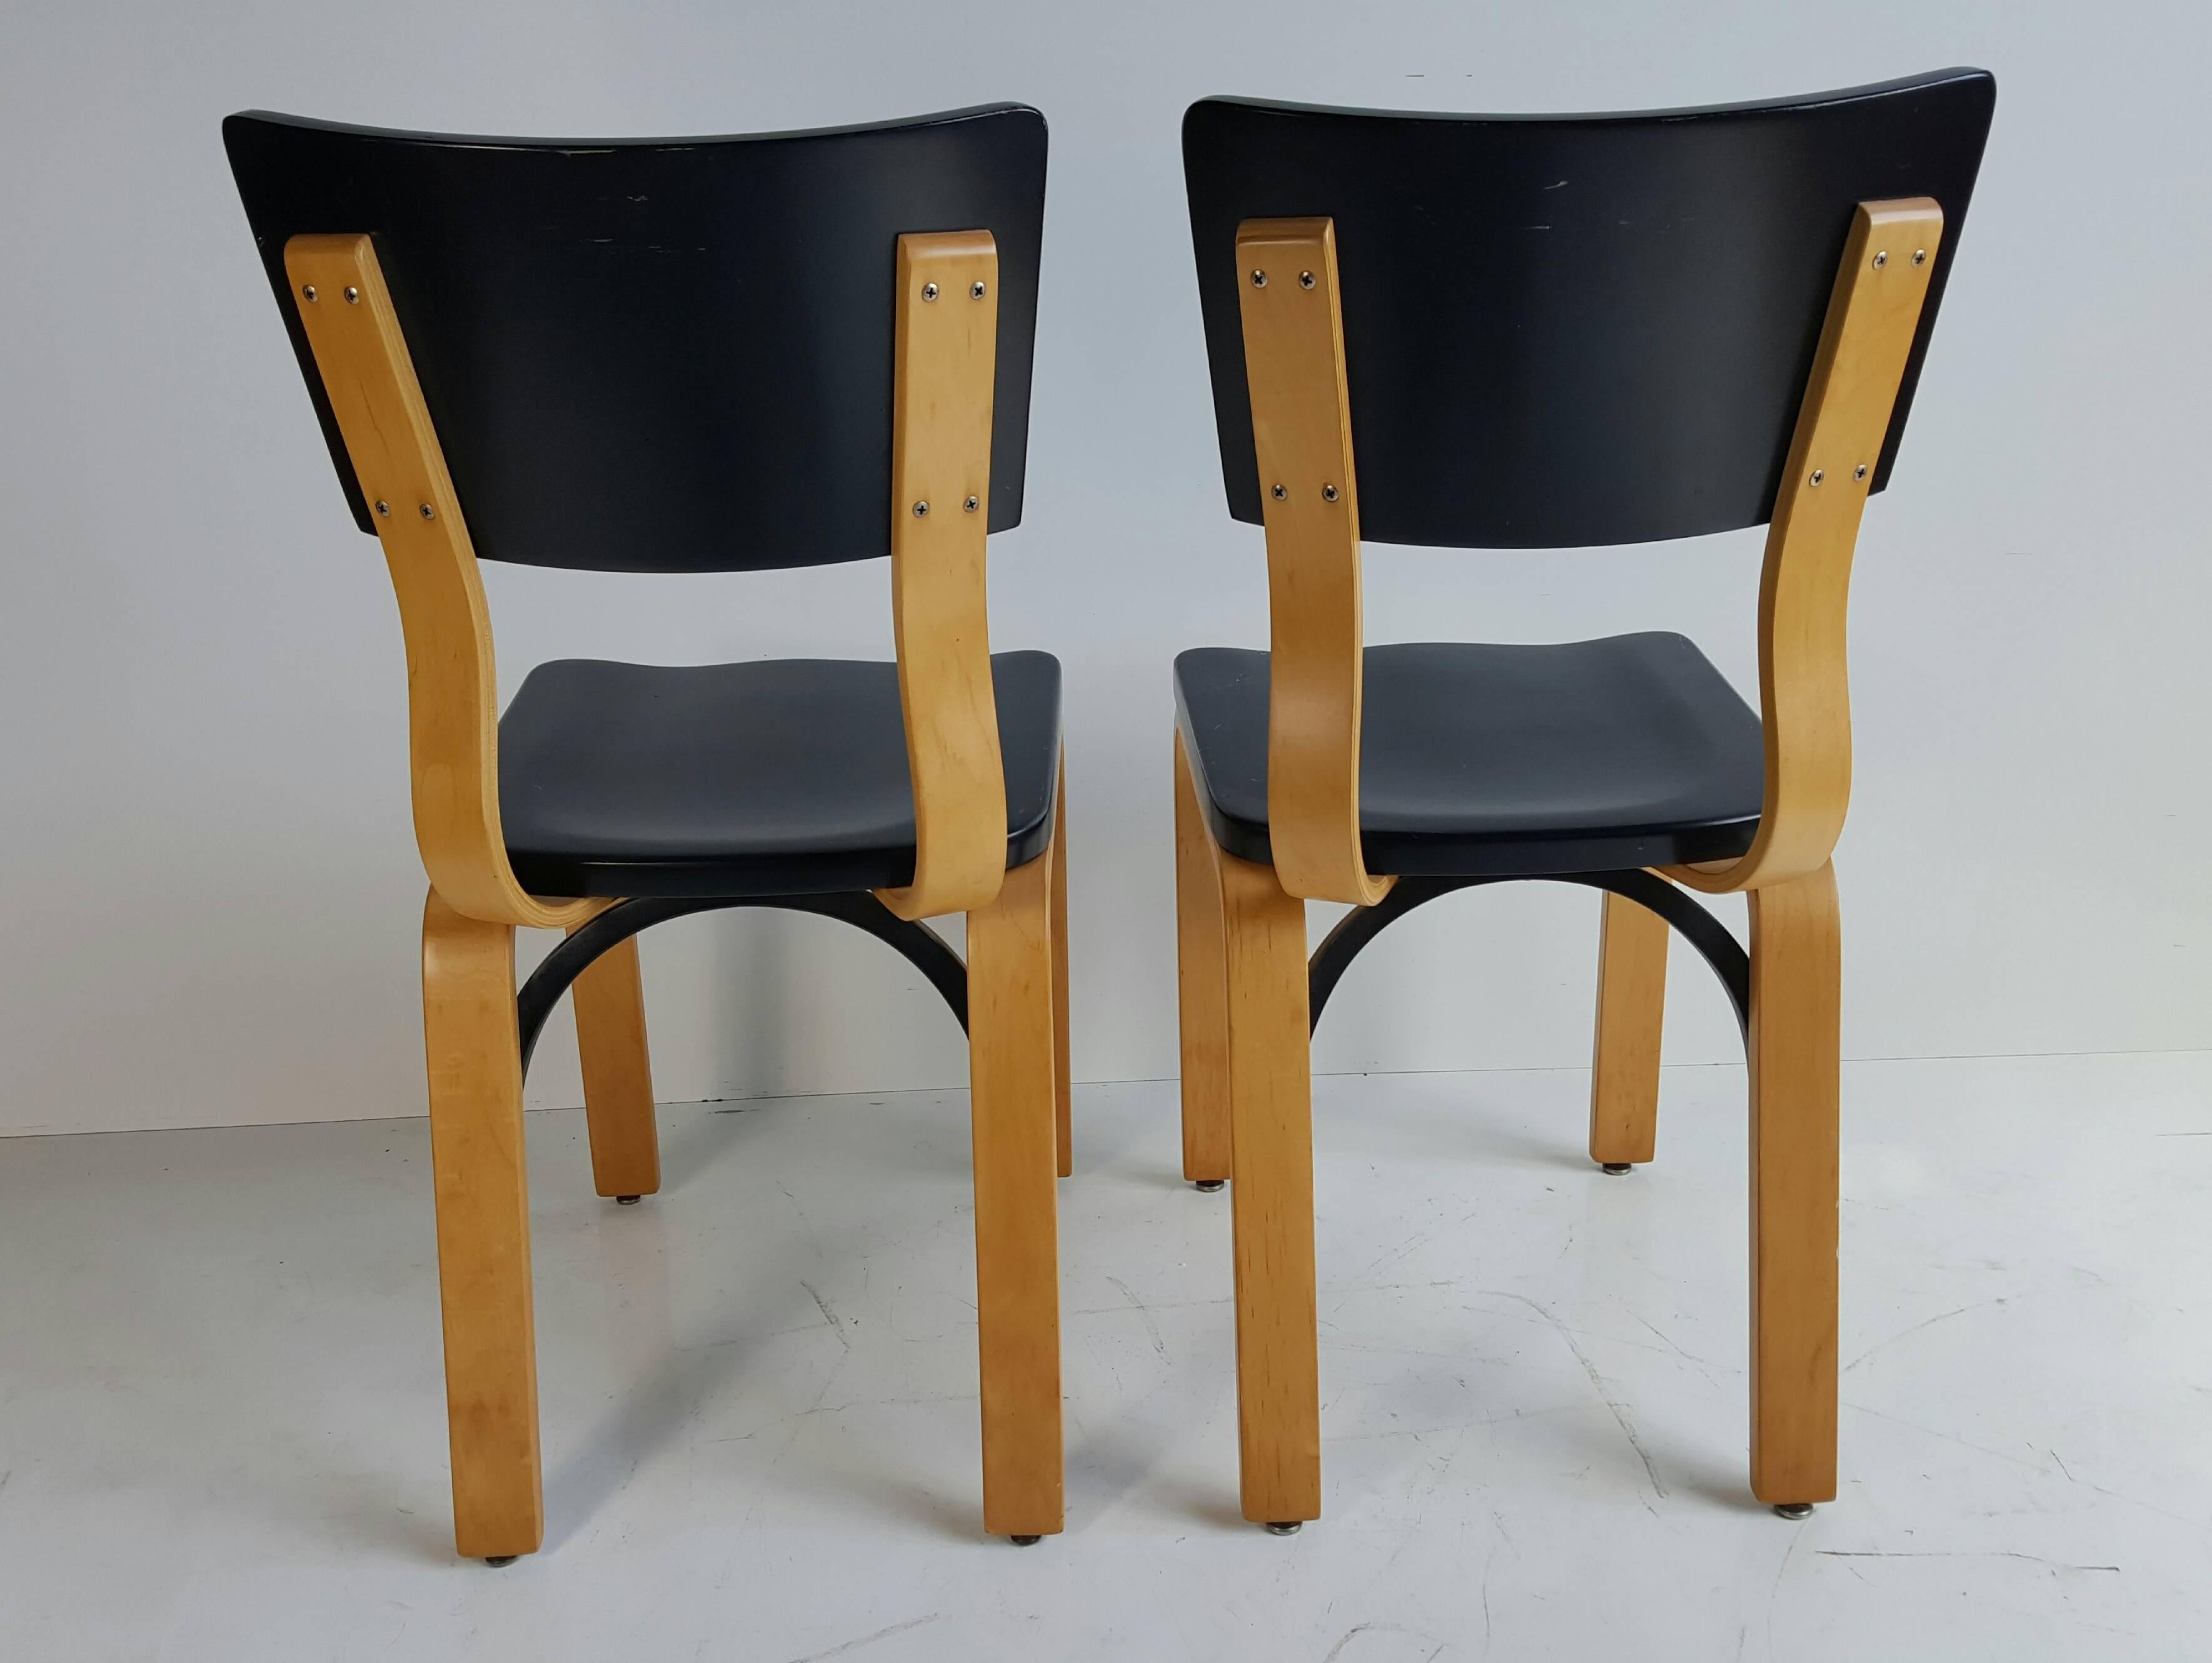 Lacquered Classic Modernist Bentwood Side Chairs by Thonet